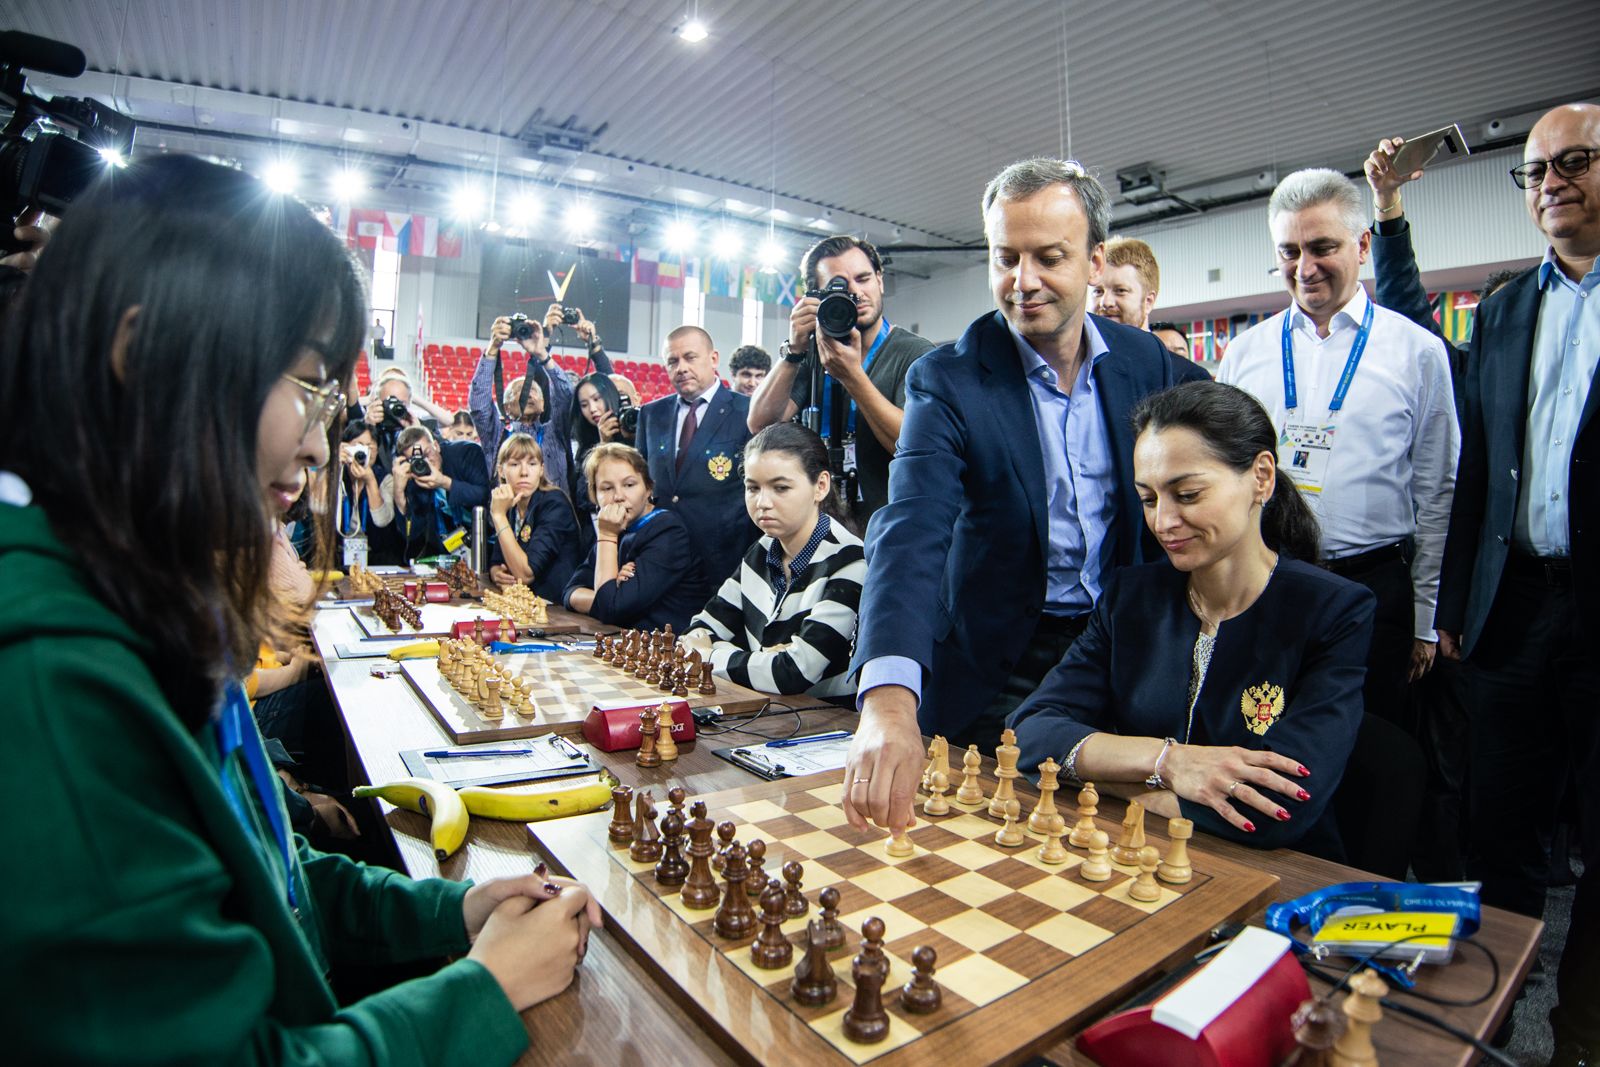 Ding Liren and Ju Wenjun from the 2018 chess Olympiad. Now both of them  today are the World Chess Champions. : r/Sino